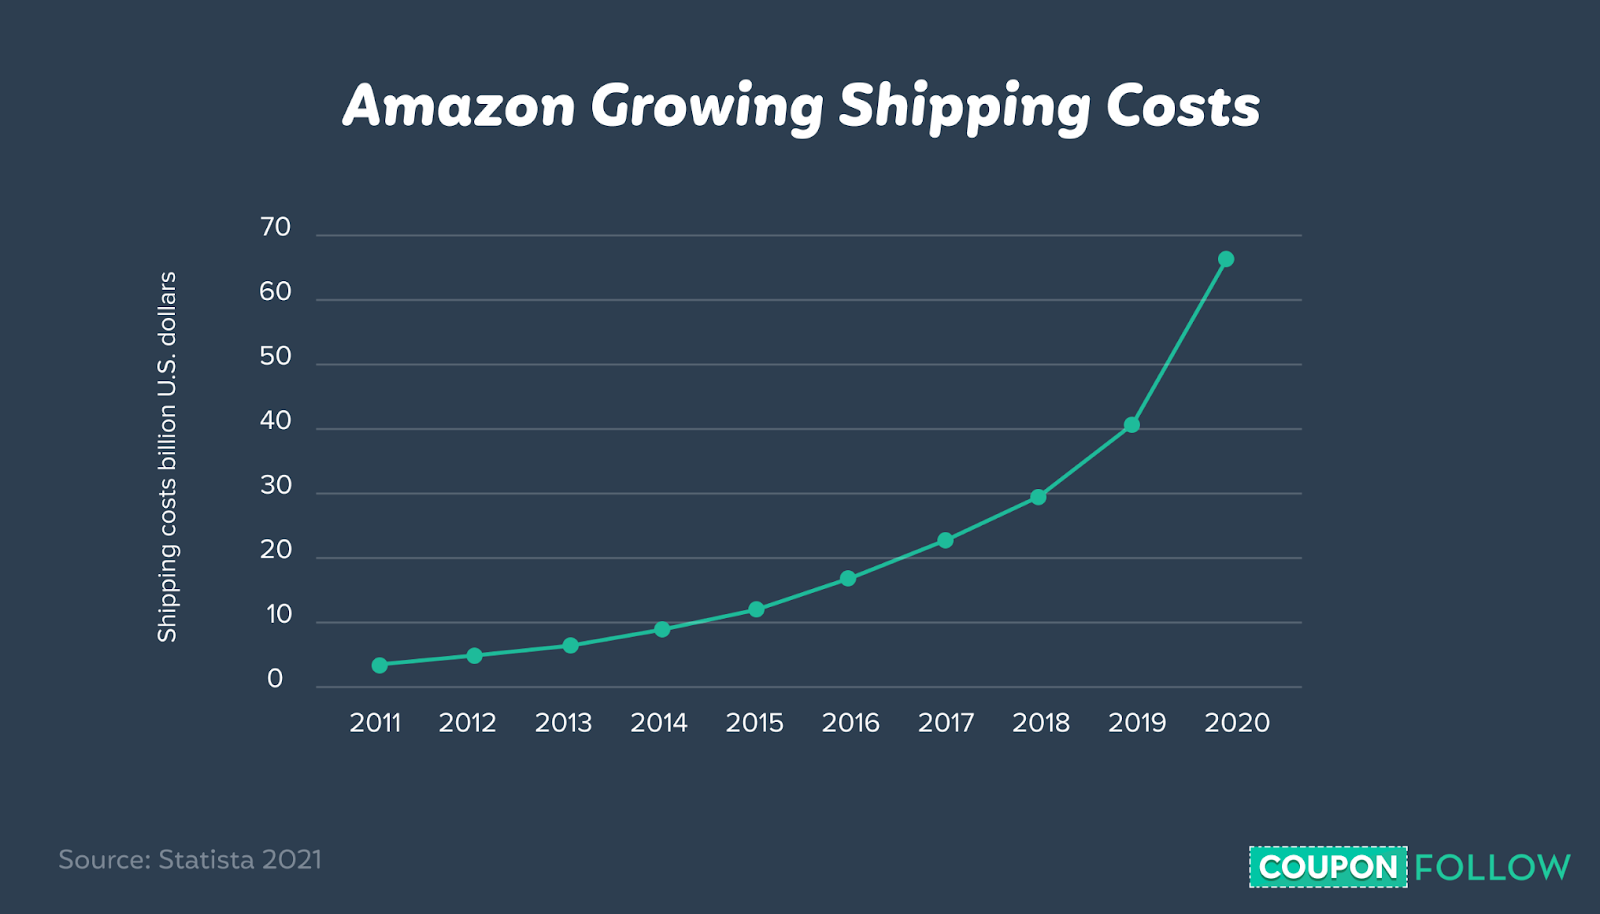 Chart showing growth of Amazon shipping costs from 2011 to 2020